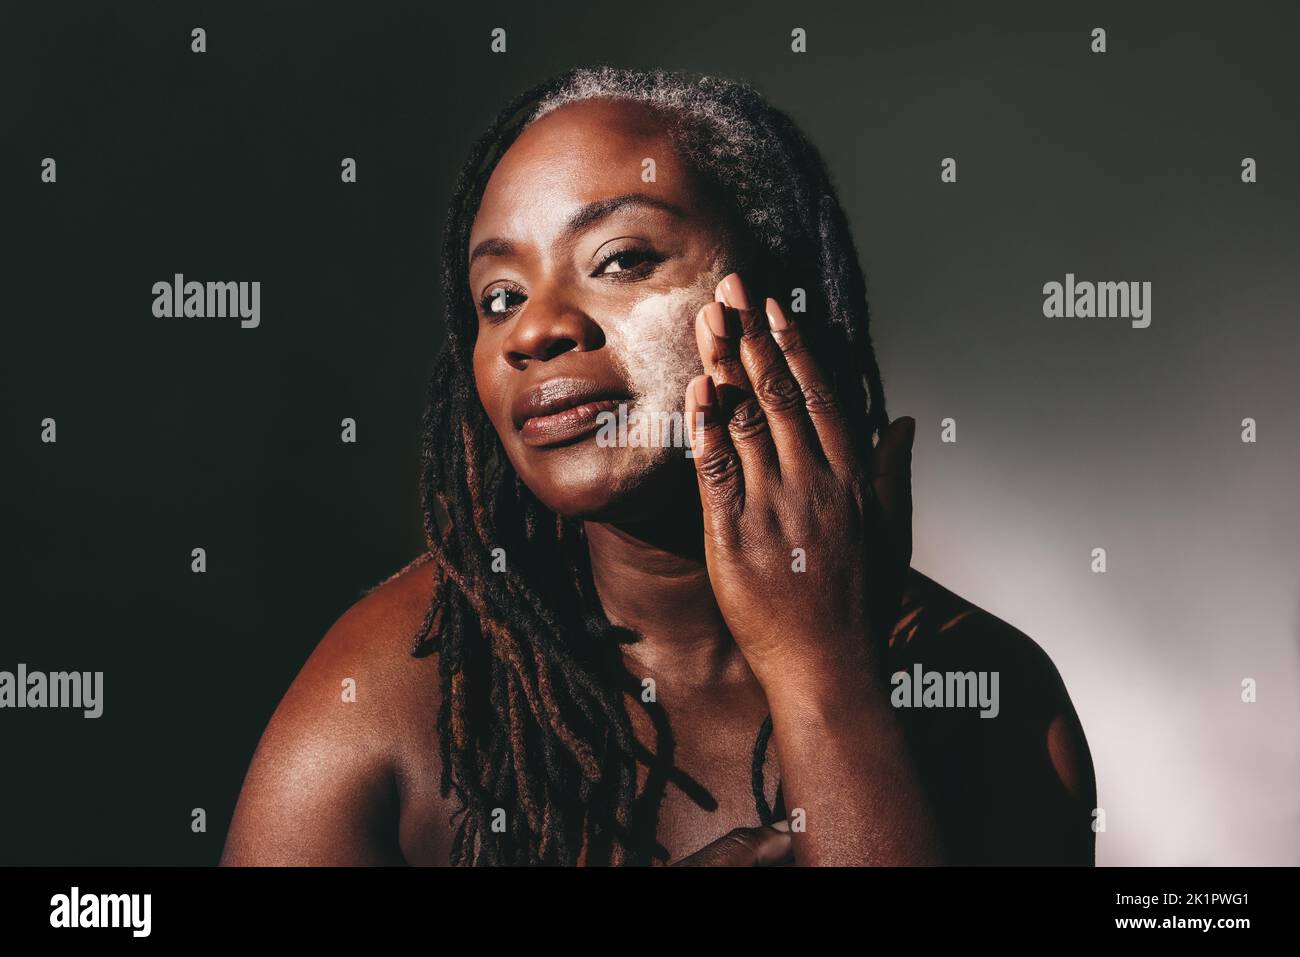 Woman with dreadlocks applying moisturizing cream on her face. Confident dark-skinned woman taking care of her flawless melanated skin. Mature black w Stock Photo